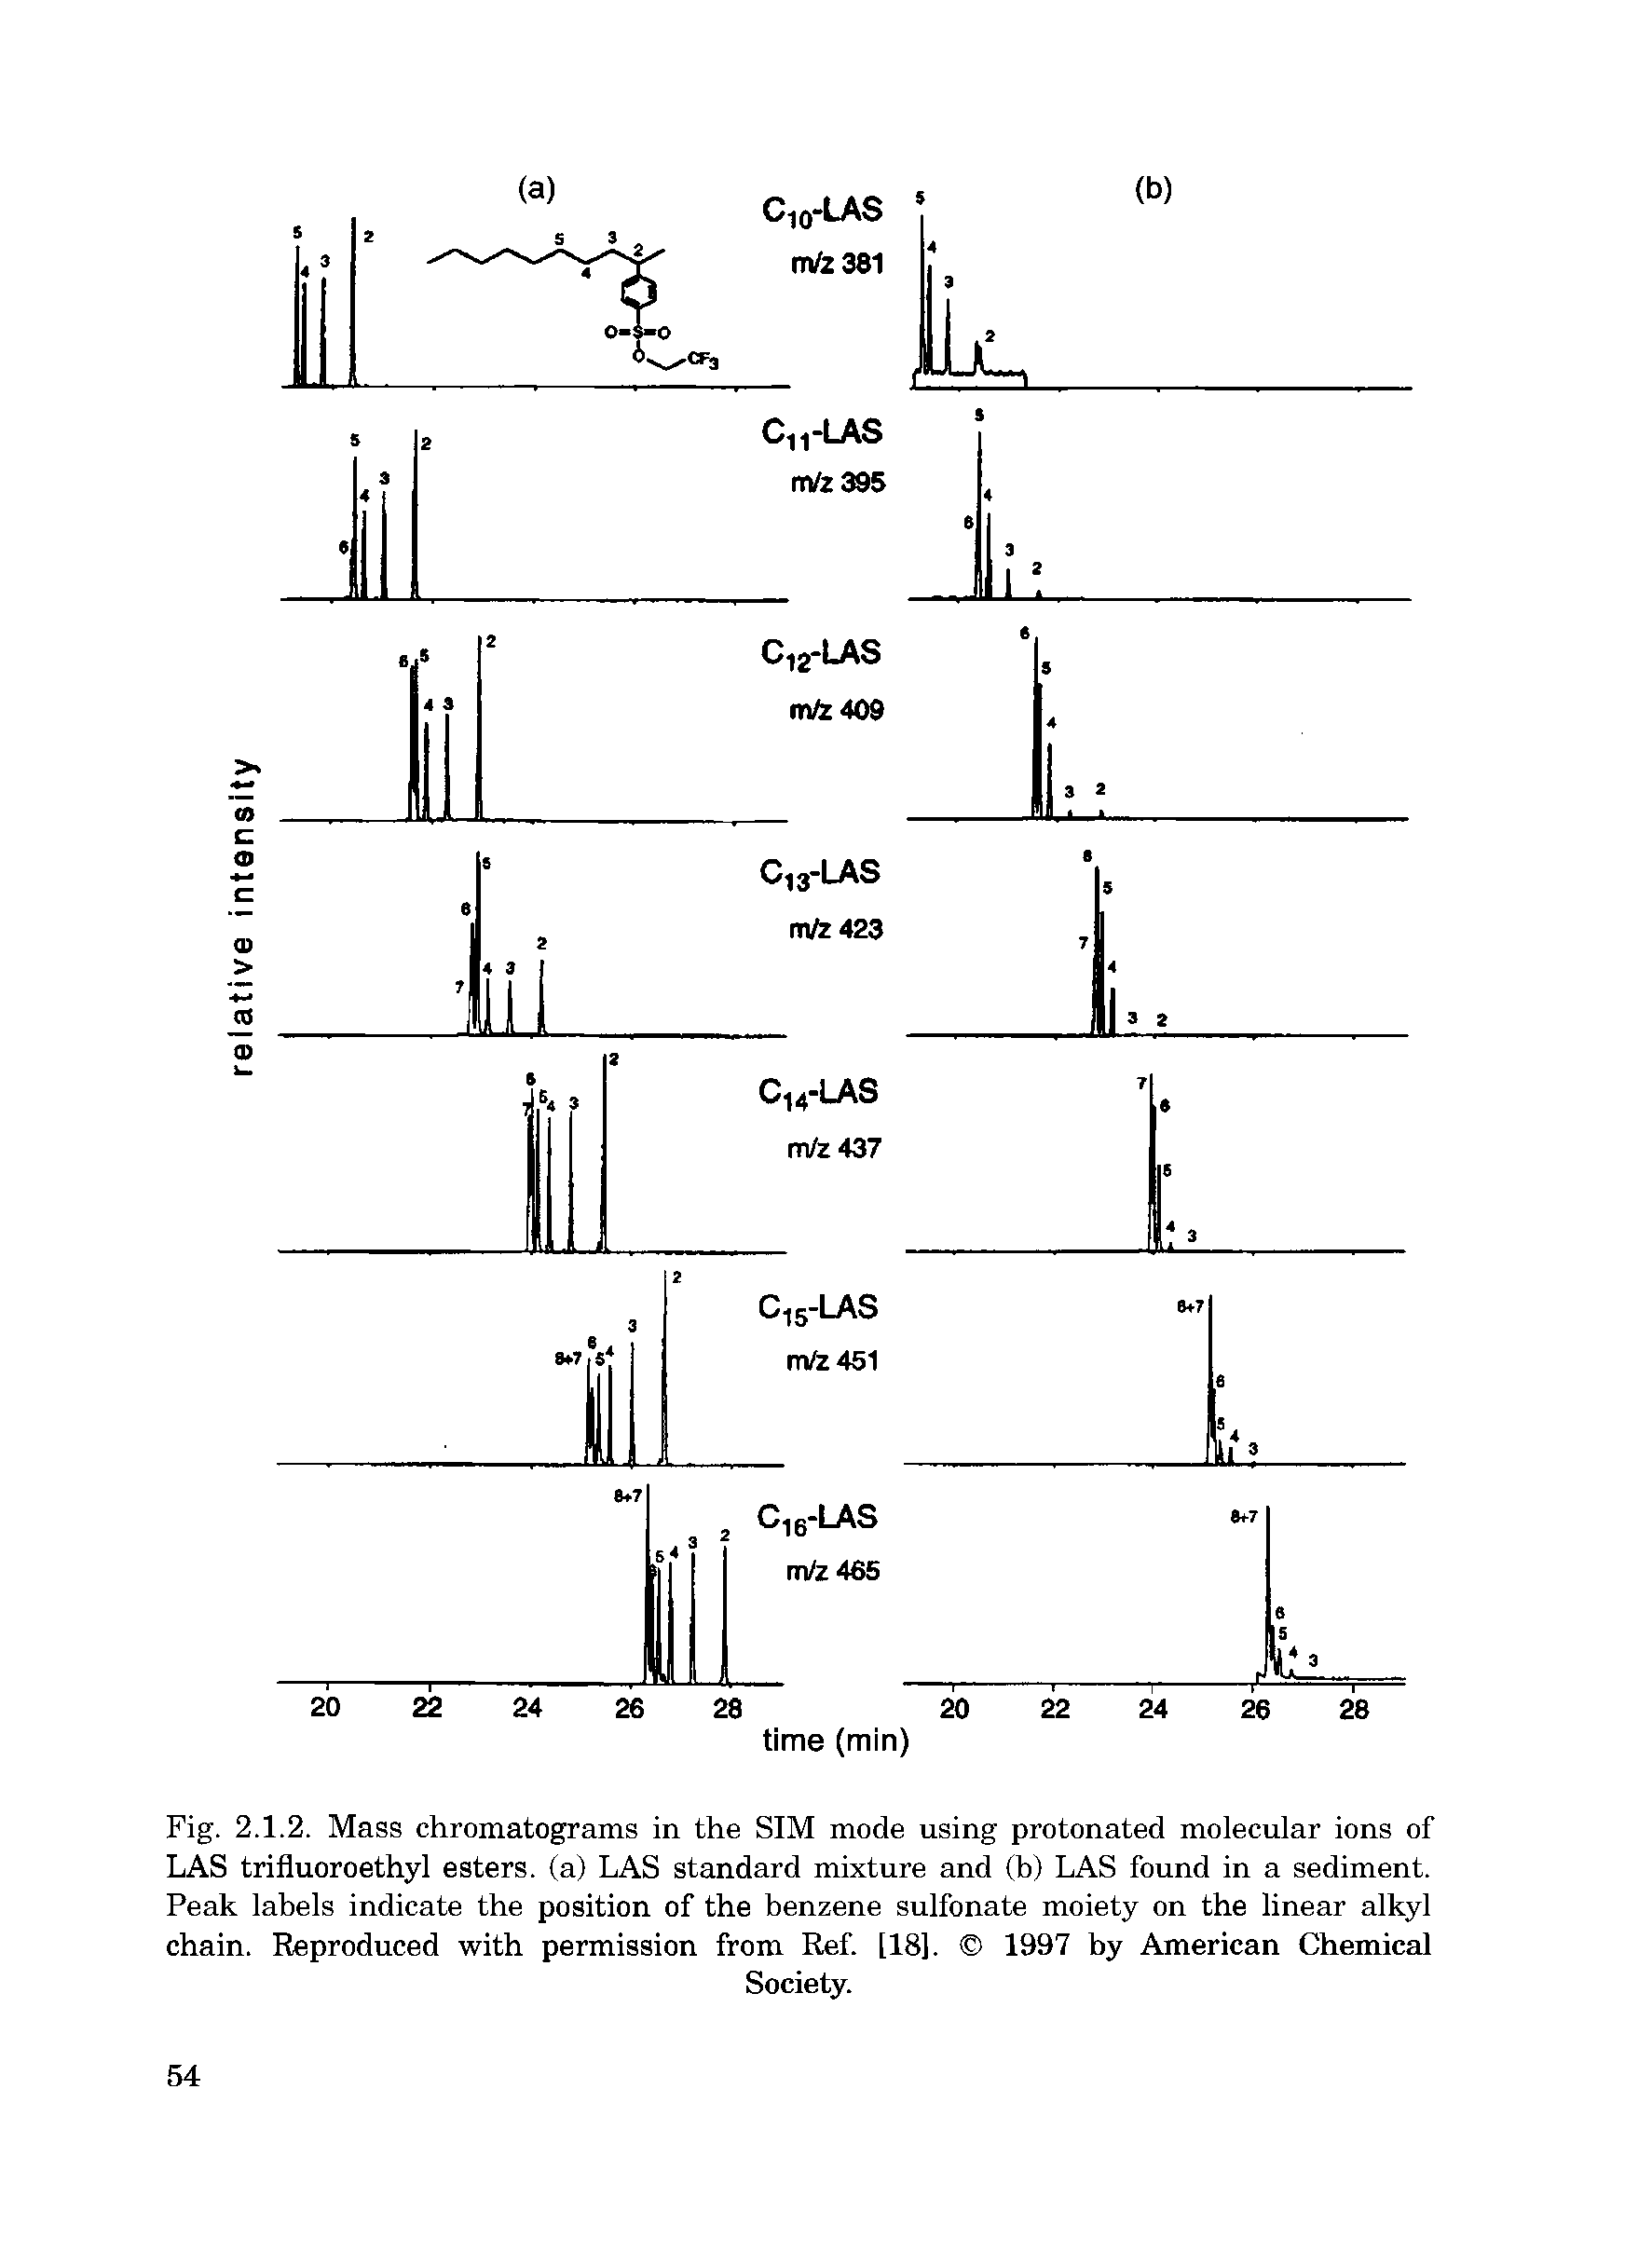 Fig. 2.1.2. Mass chromatograms in the SIM mode using protonated molecular ions of LAS trifluoroethyl esters, (a) LAS standard mixture and (b) LAS found in a sediment. Peak labels indicate the position of the benzene sulfonate moiety on the linear alkyl chain. Reproduced with permission from Ref. [18]. 1997 by American Chemical...